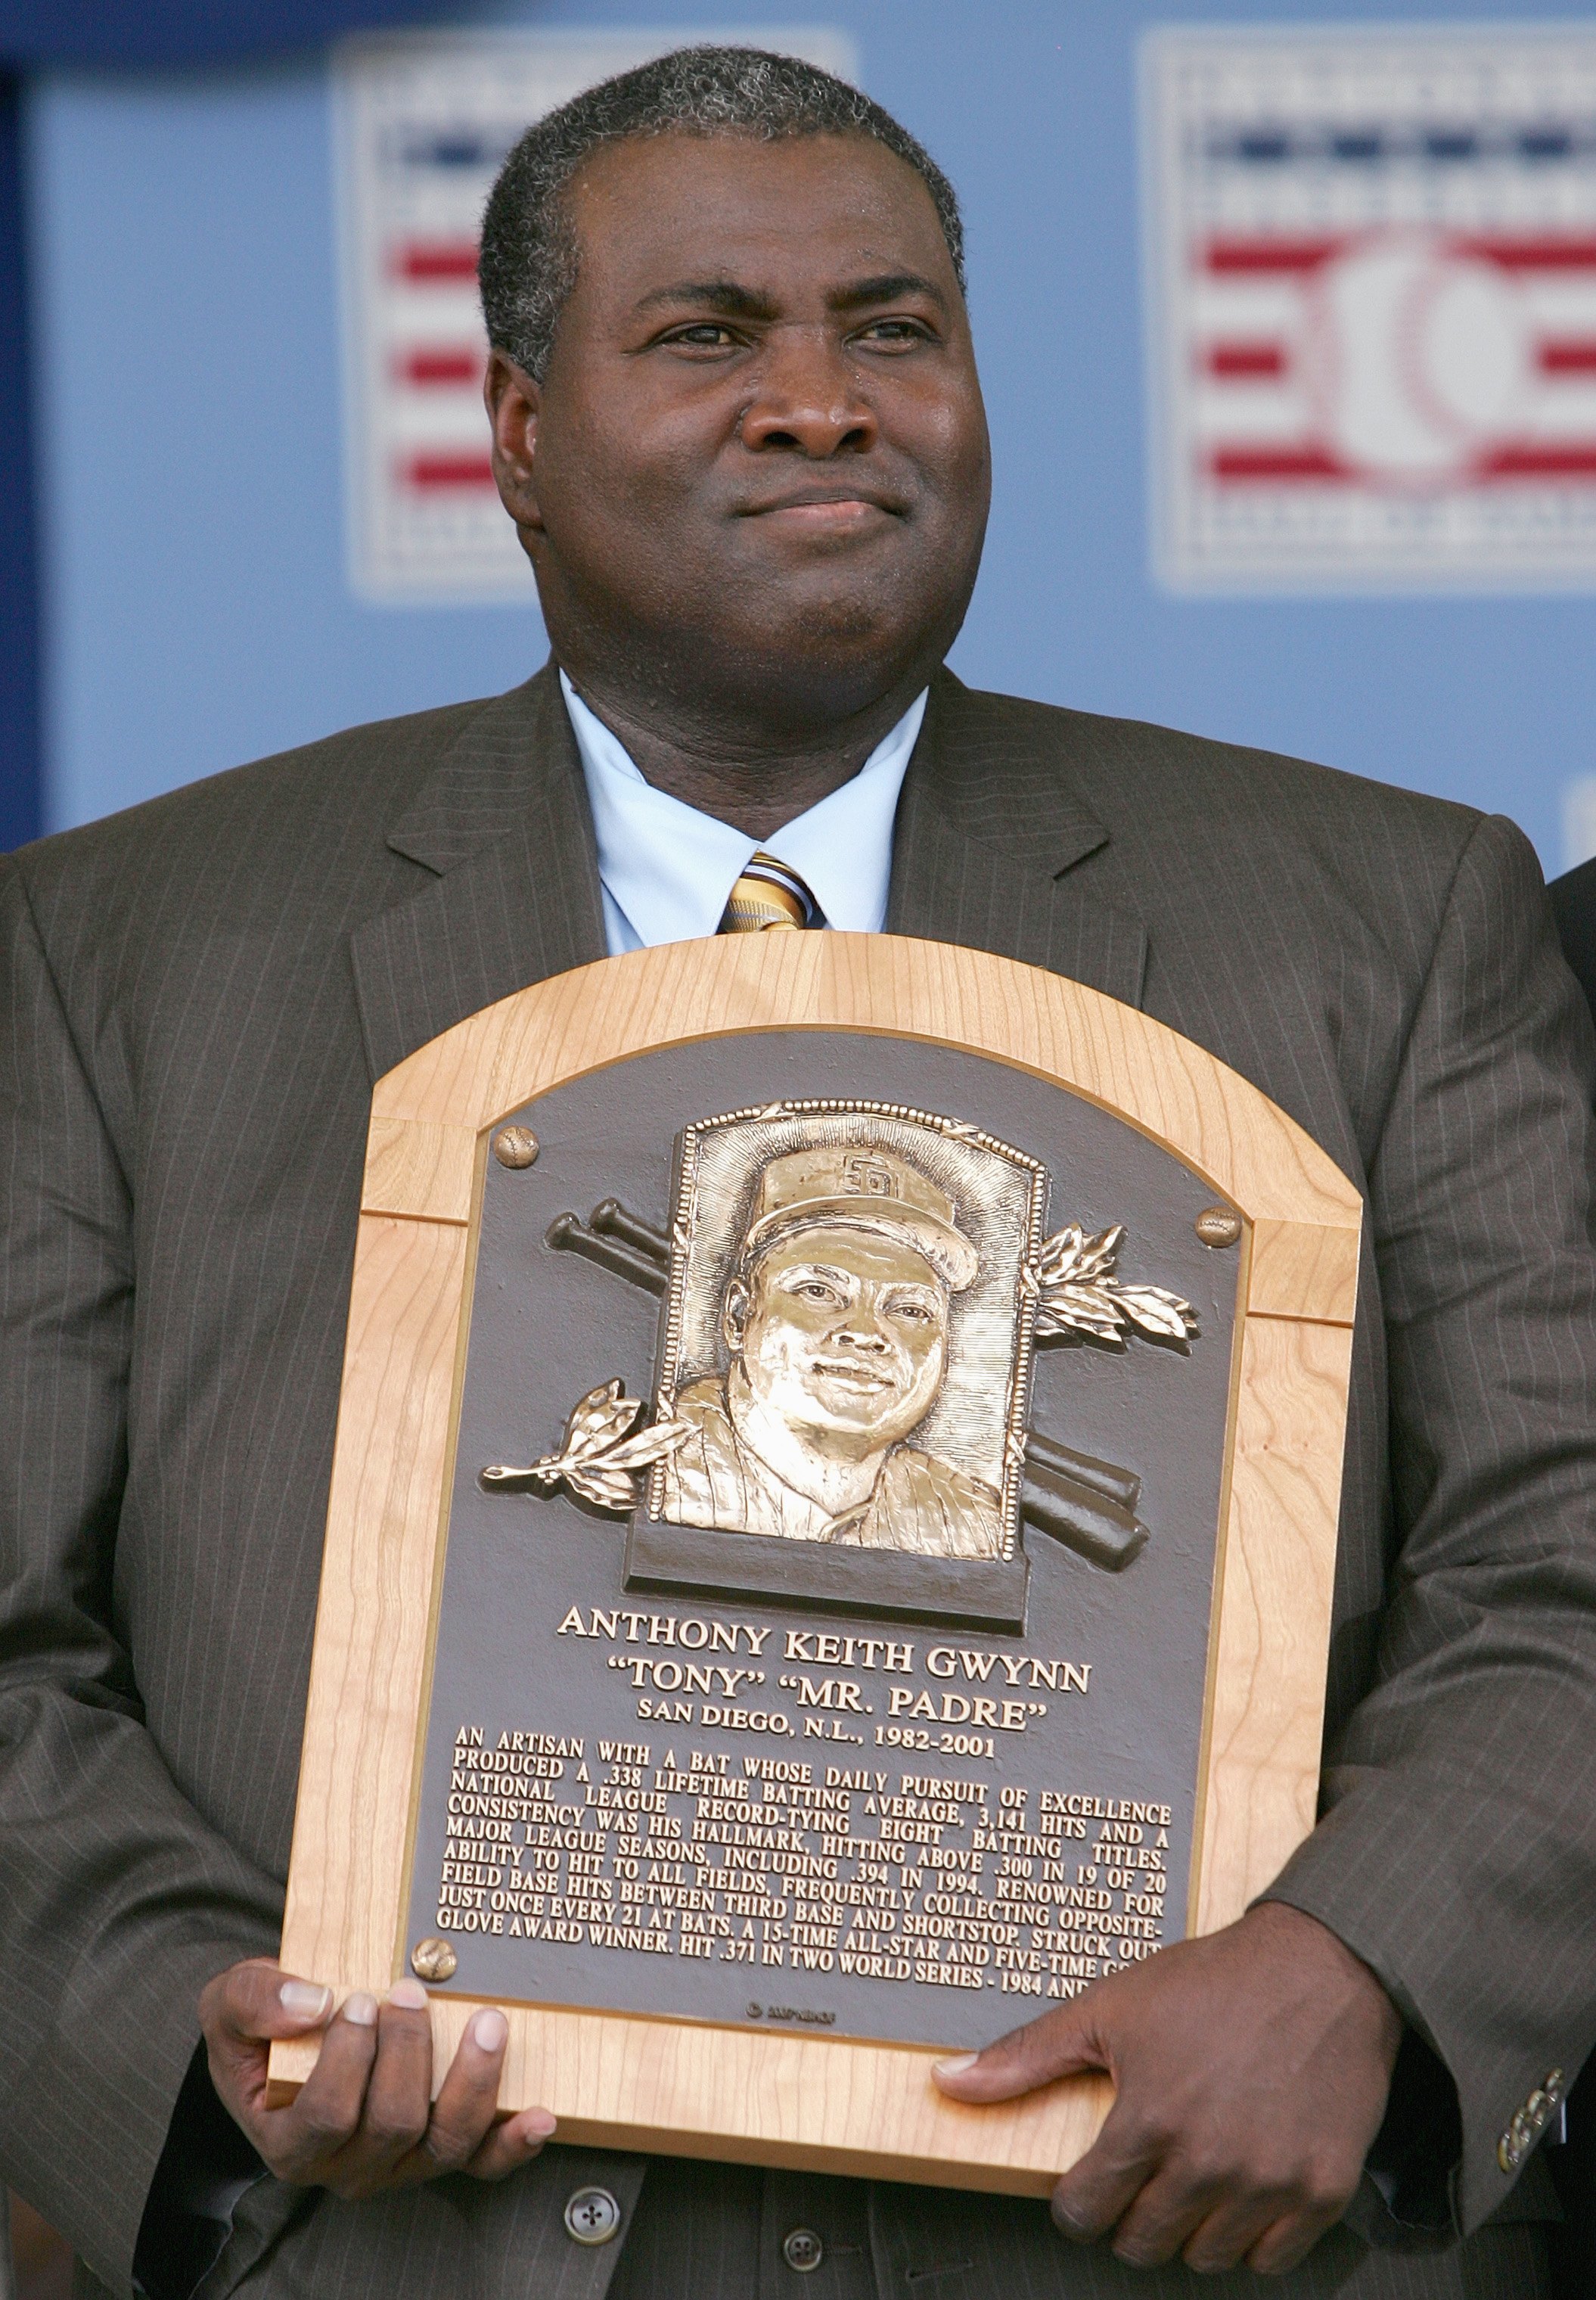 COOPERSTOWN, NY - JULY 29: 2007 inductee Tony Gwynn poses with his plaque at Clark Sports Center during the Baseball Hall of Fame induction ceremony on July 29, 2007 in Cooperstown, New York. (Photo by Chris McGrath/Getty Images)